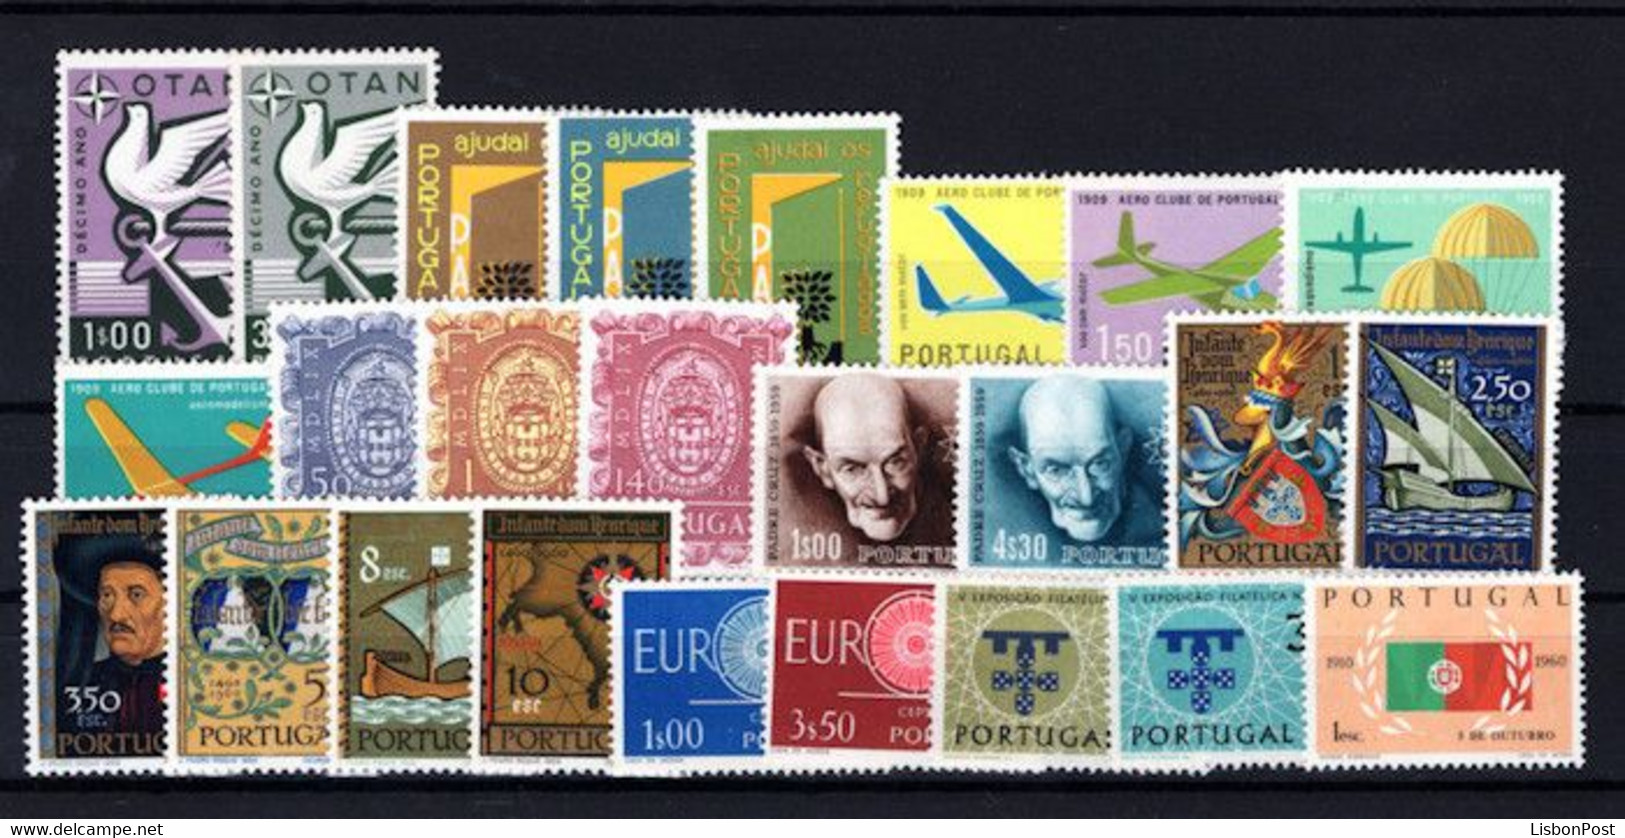 1960 Portugal Azores Madeira Complete Year MNH Stamps. Année Compléte NeufSansCharnière. Ano Completo Novo Sem Charneira - Annate Complete